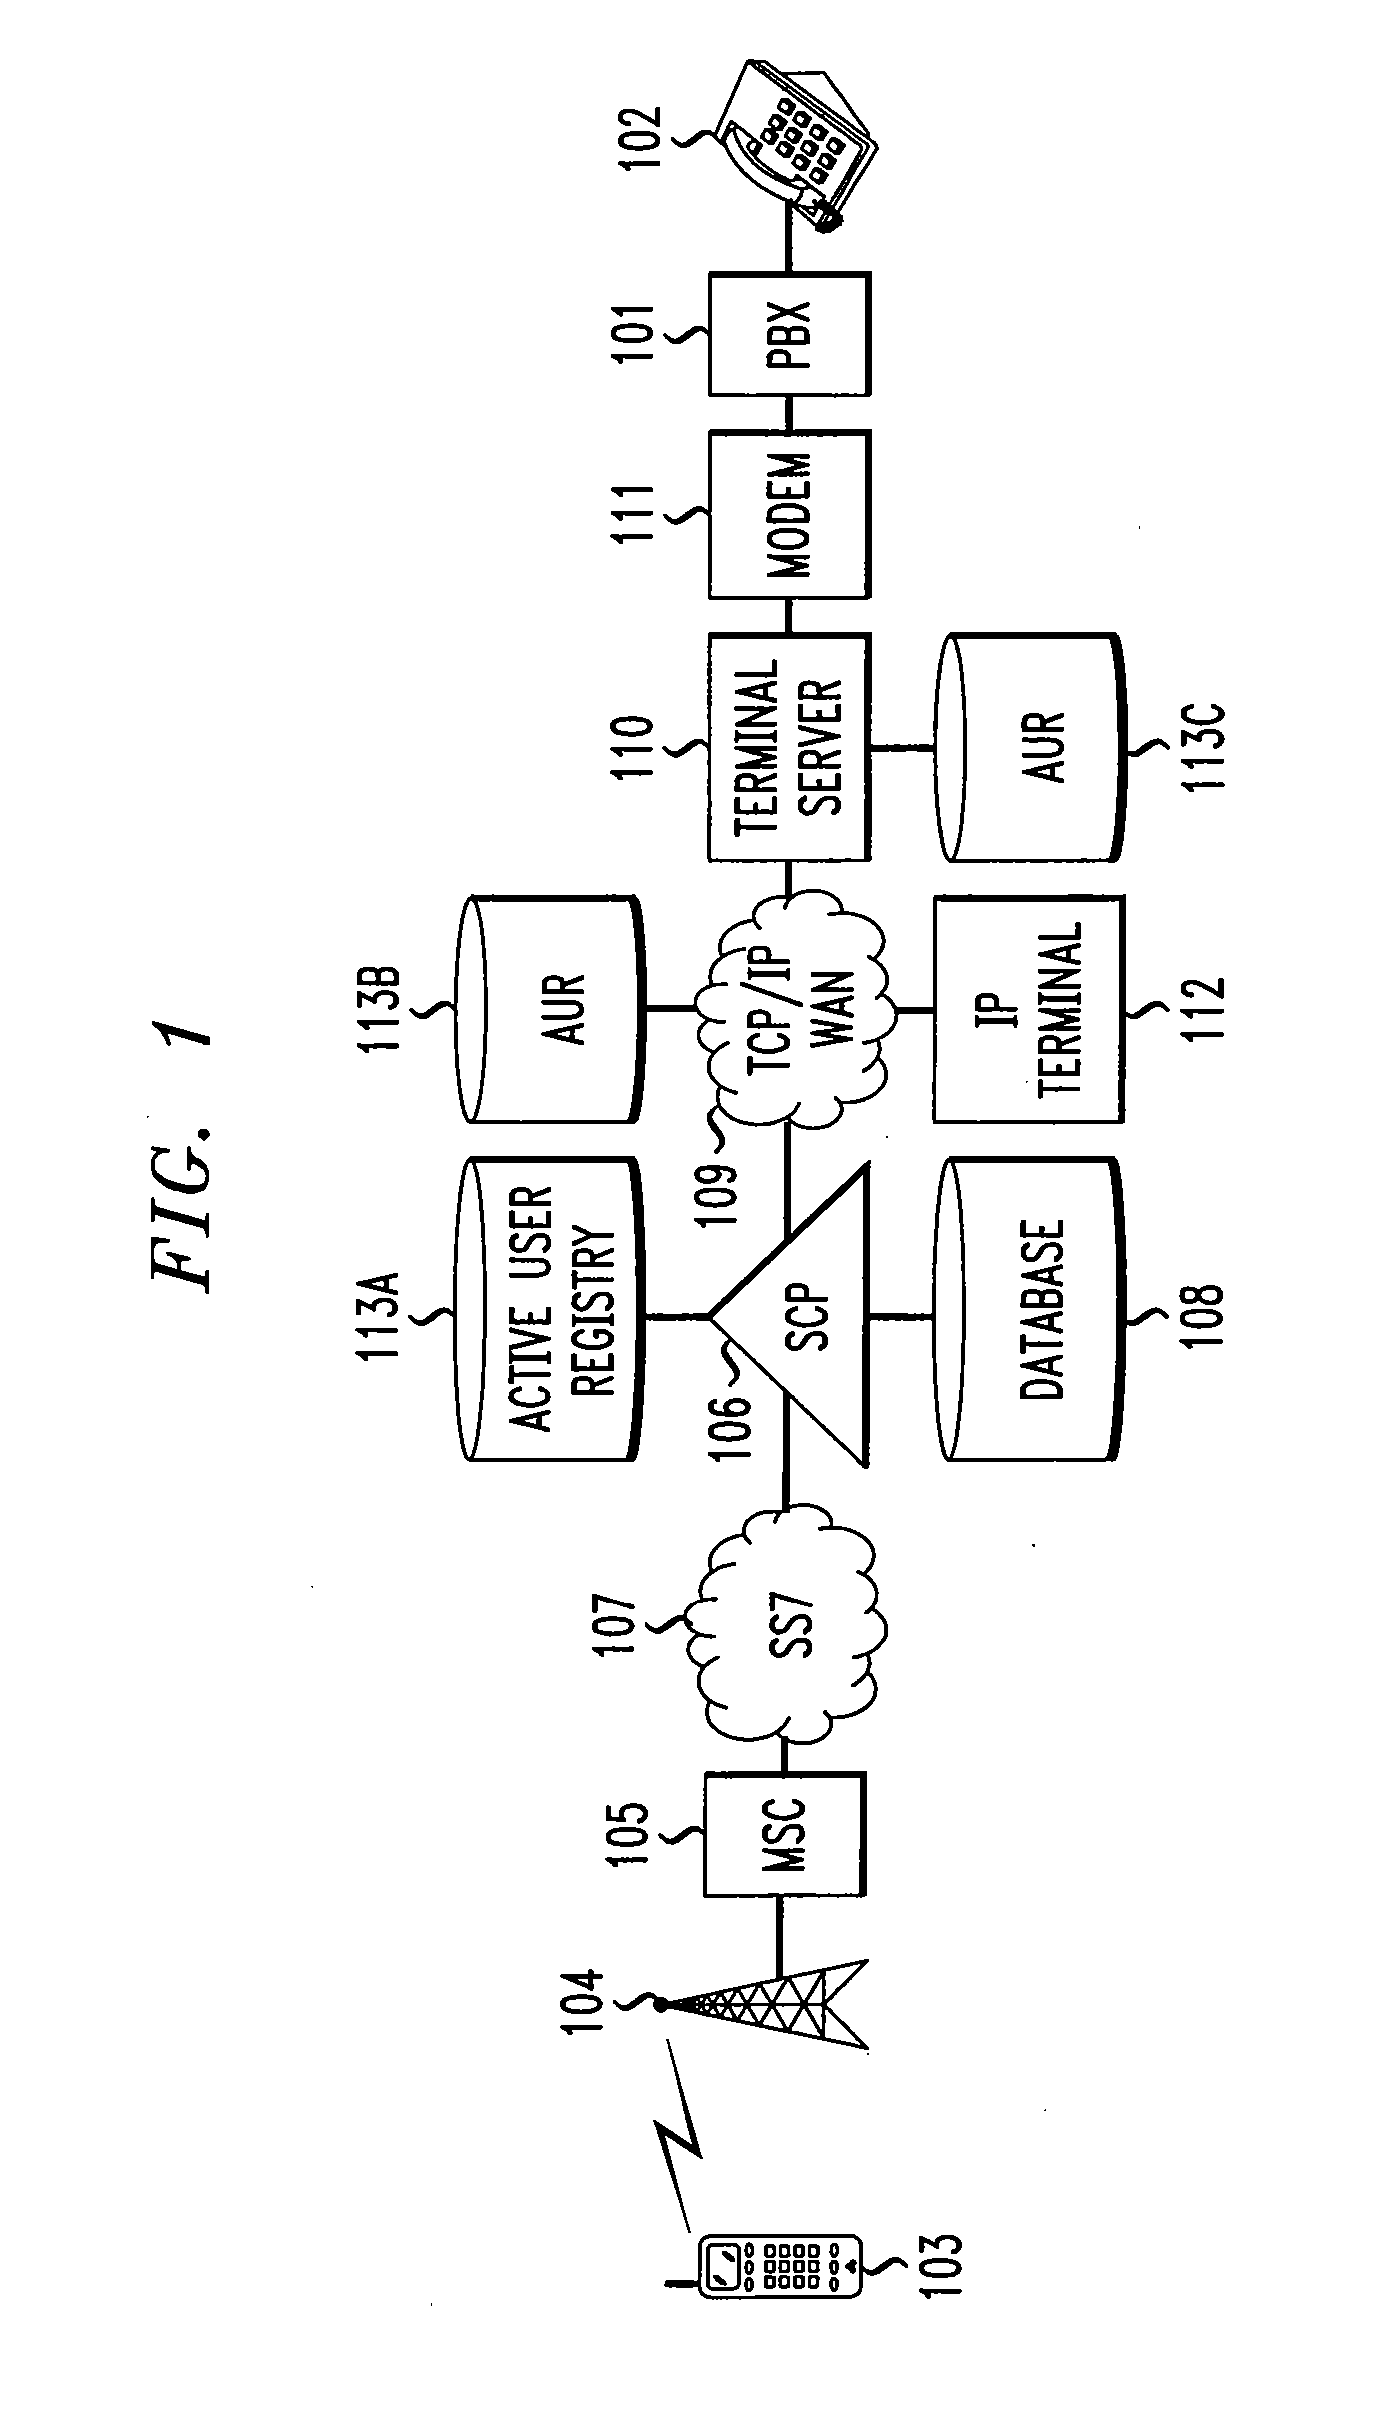 Method and System for Remote Call Forwarding of Telephone Calls from an IP Connection